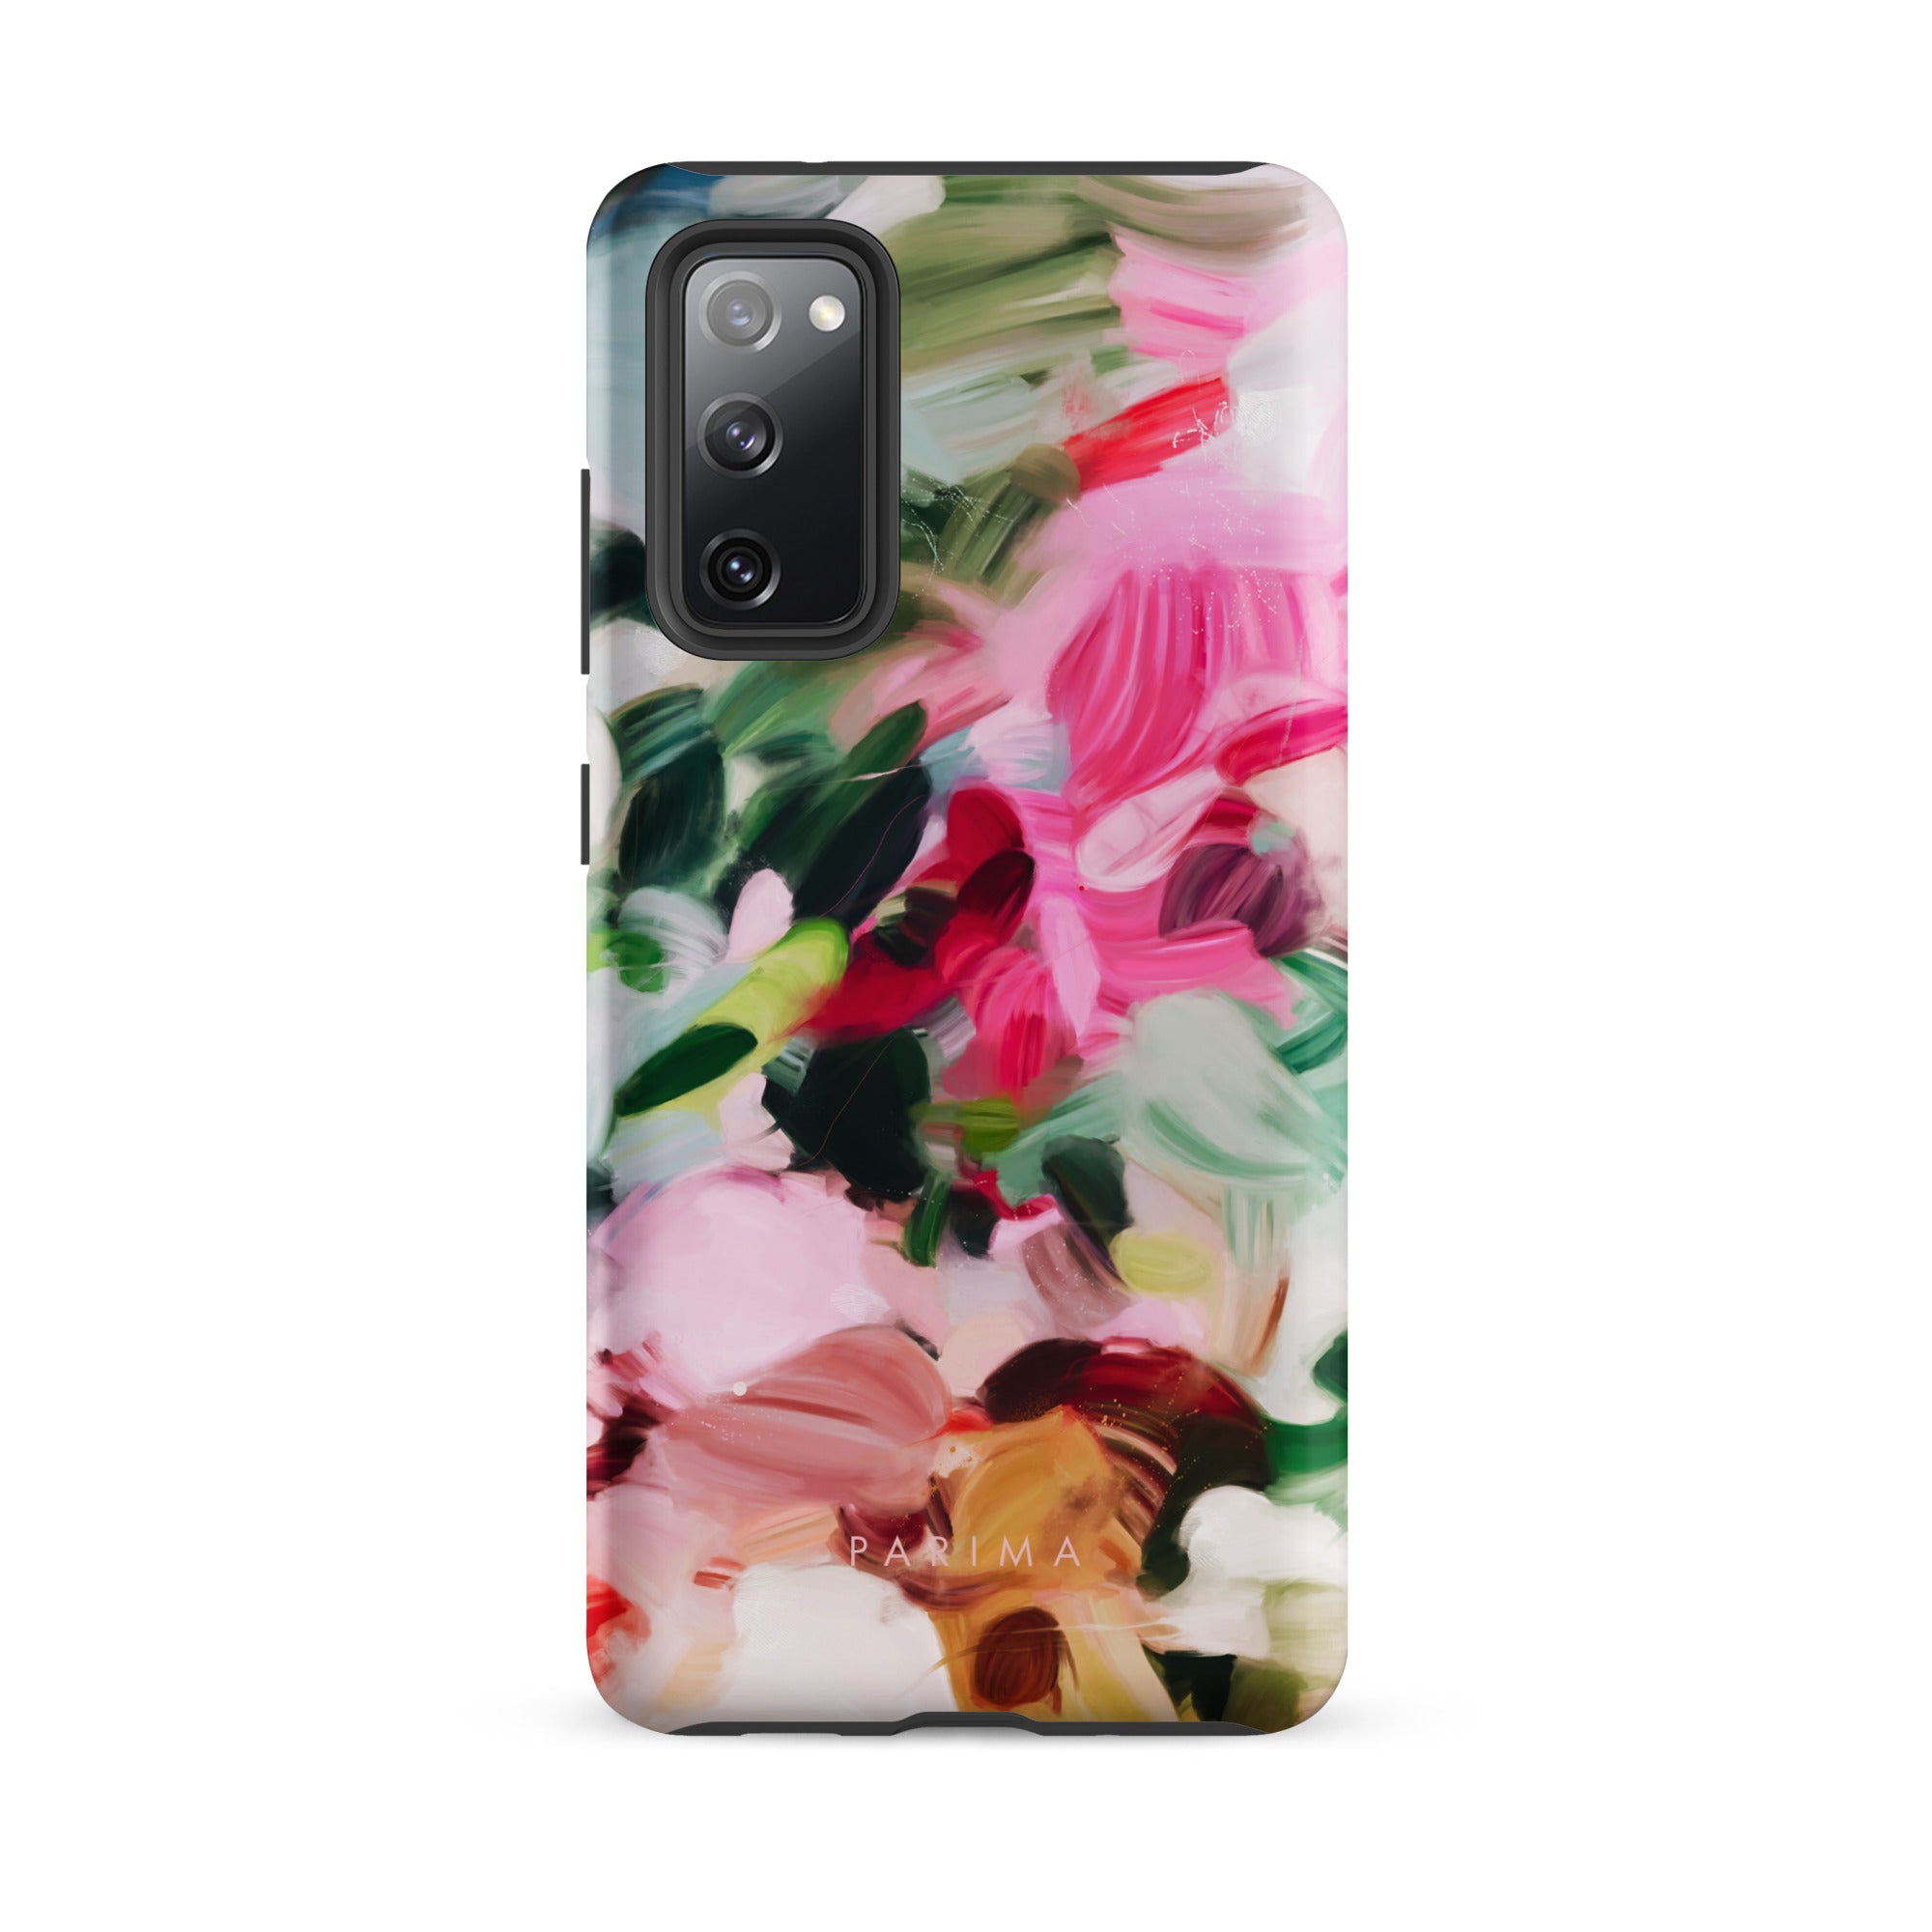 Bloom, pink and green abstract art on Samsung Galaxy S20 FE tough case by Parima Studio